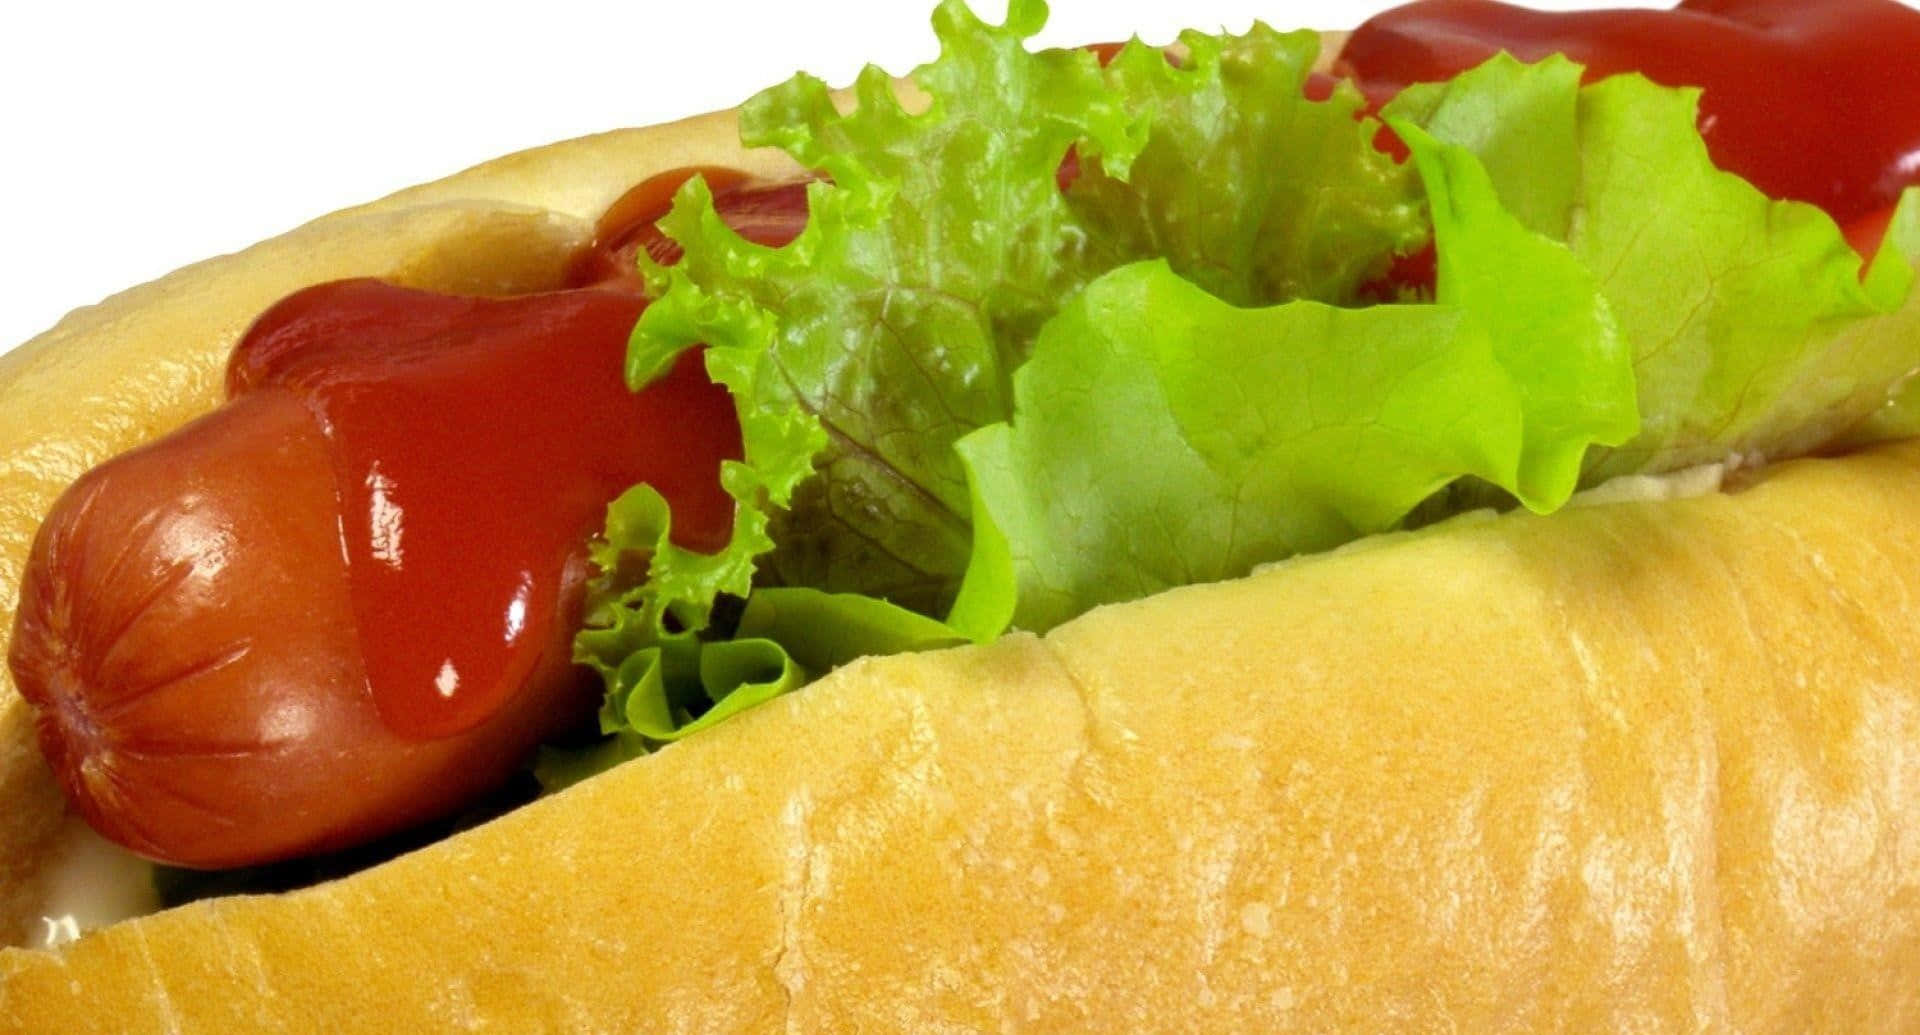 A Hot Dog With Ketchup And Lettuce